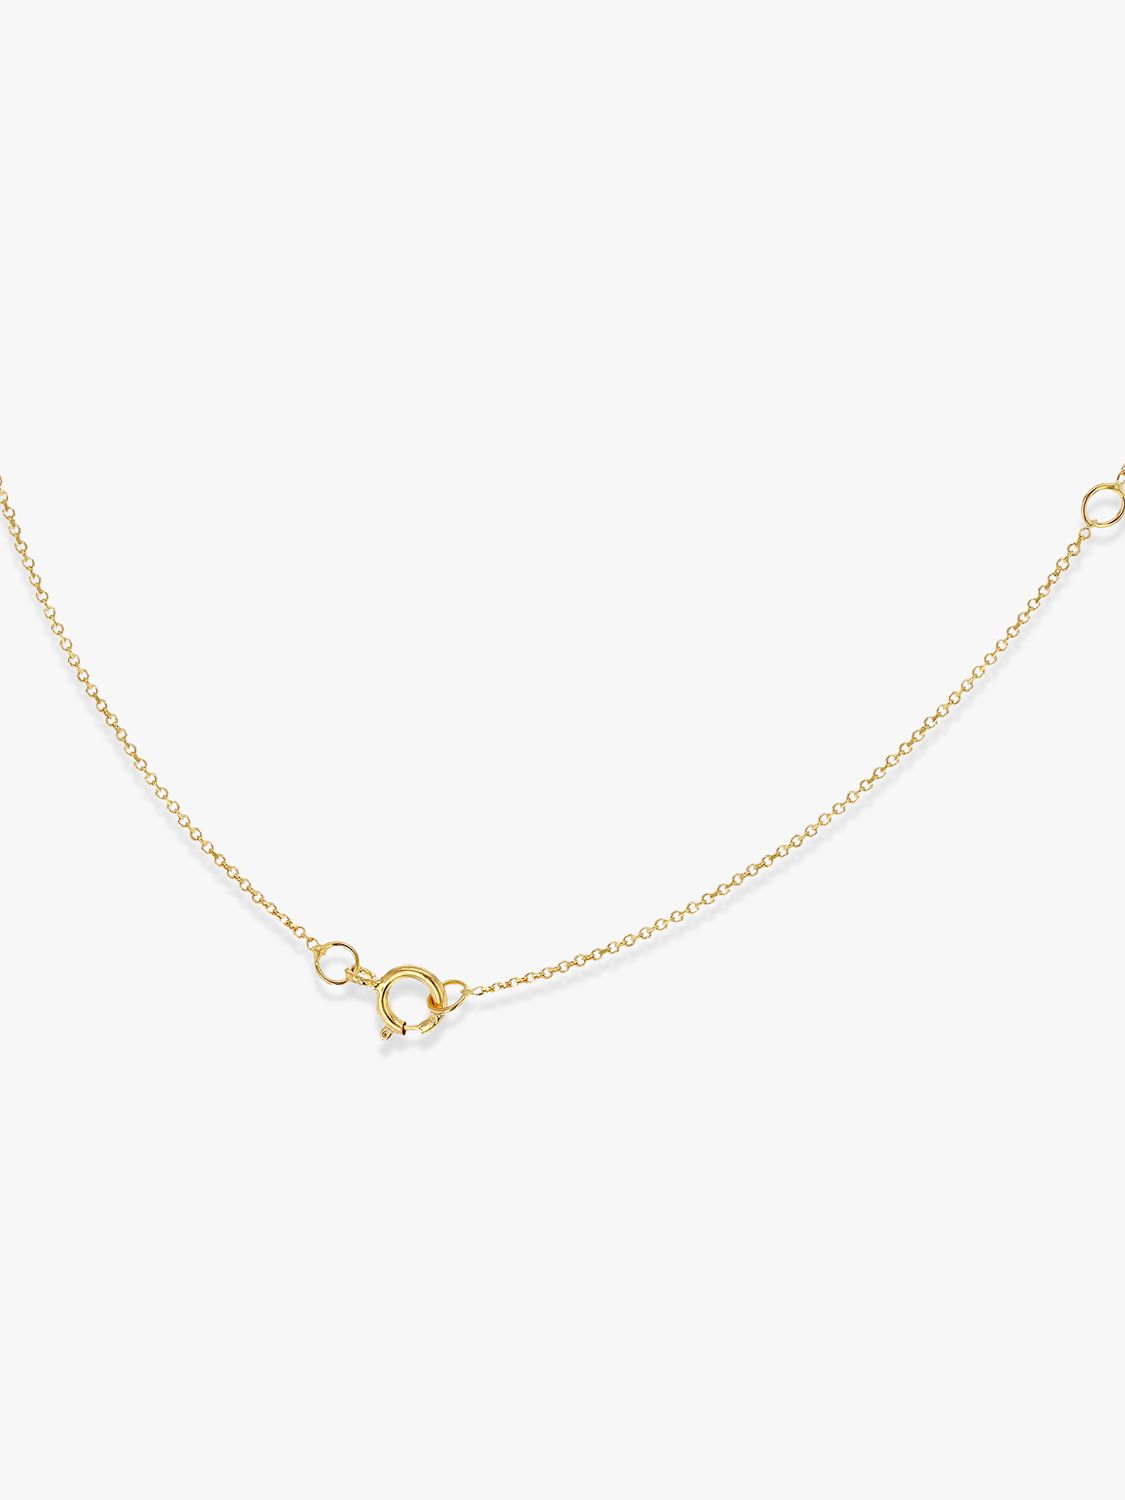 Buy IBB 9ct Yellow Gold Initial Necklace Online at johnlewis.com